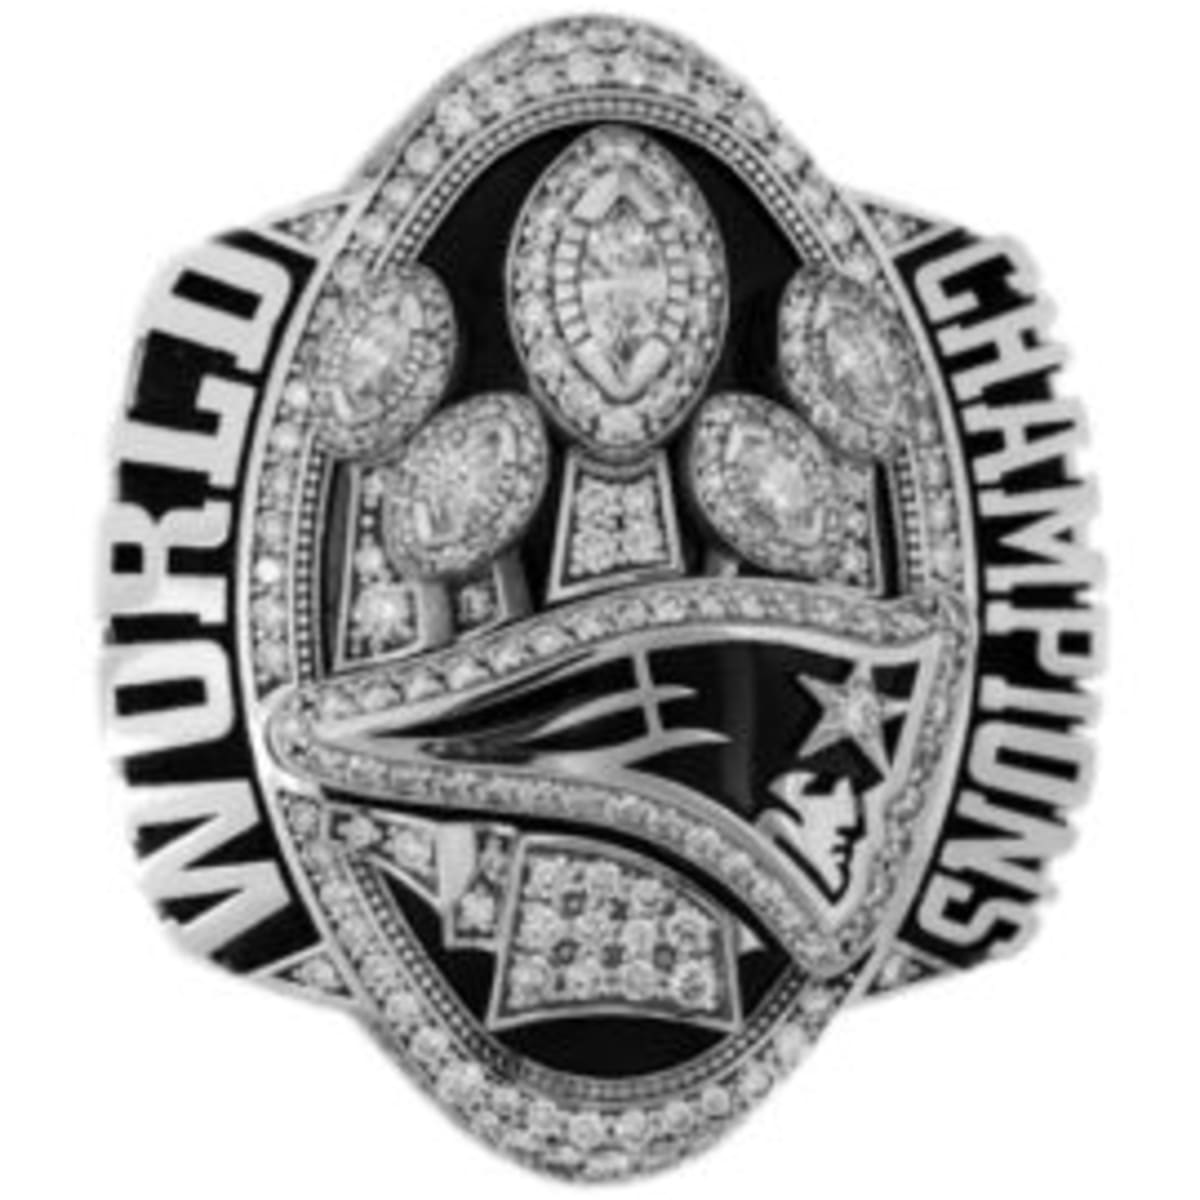 1999 ST LOUIS RAMS SUPER BOWL XXXIV CHAMPIONSHIP RING - Buy and Sell Championship  Rings